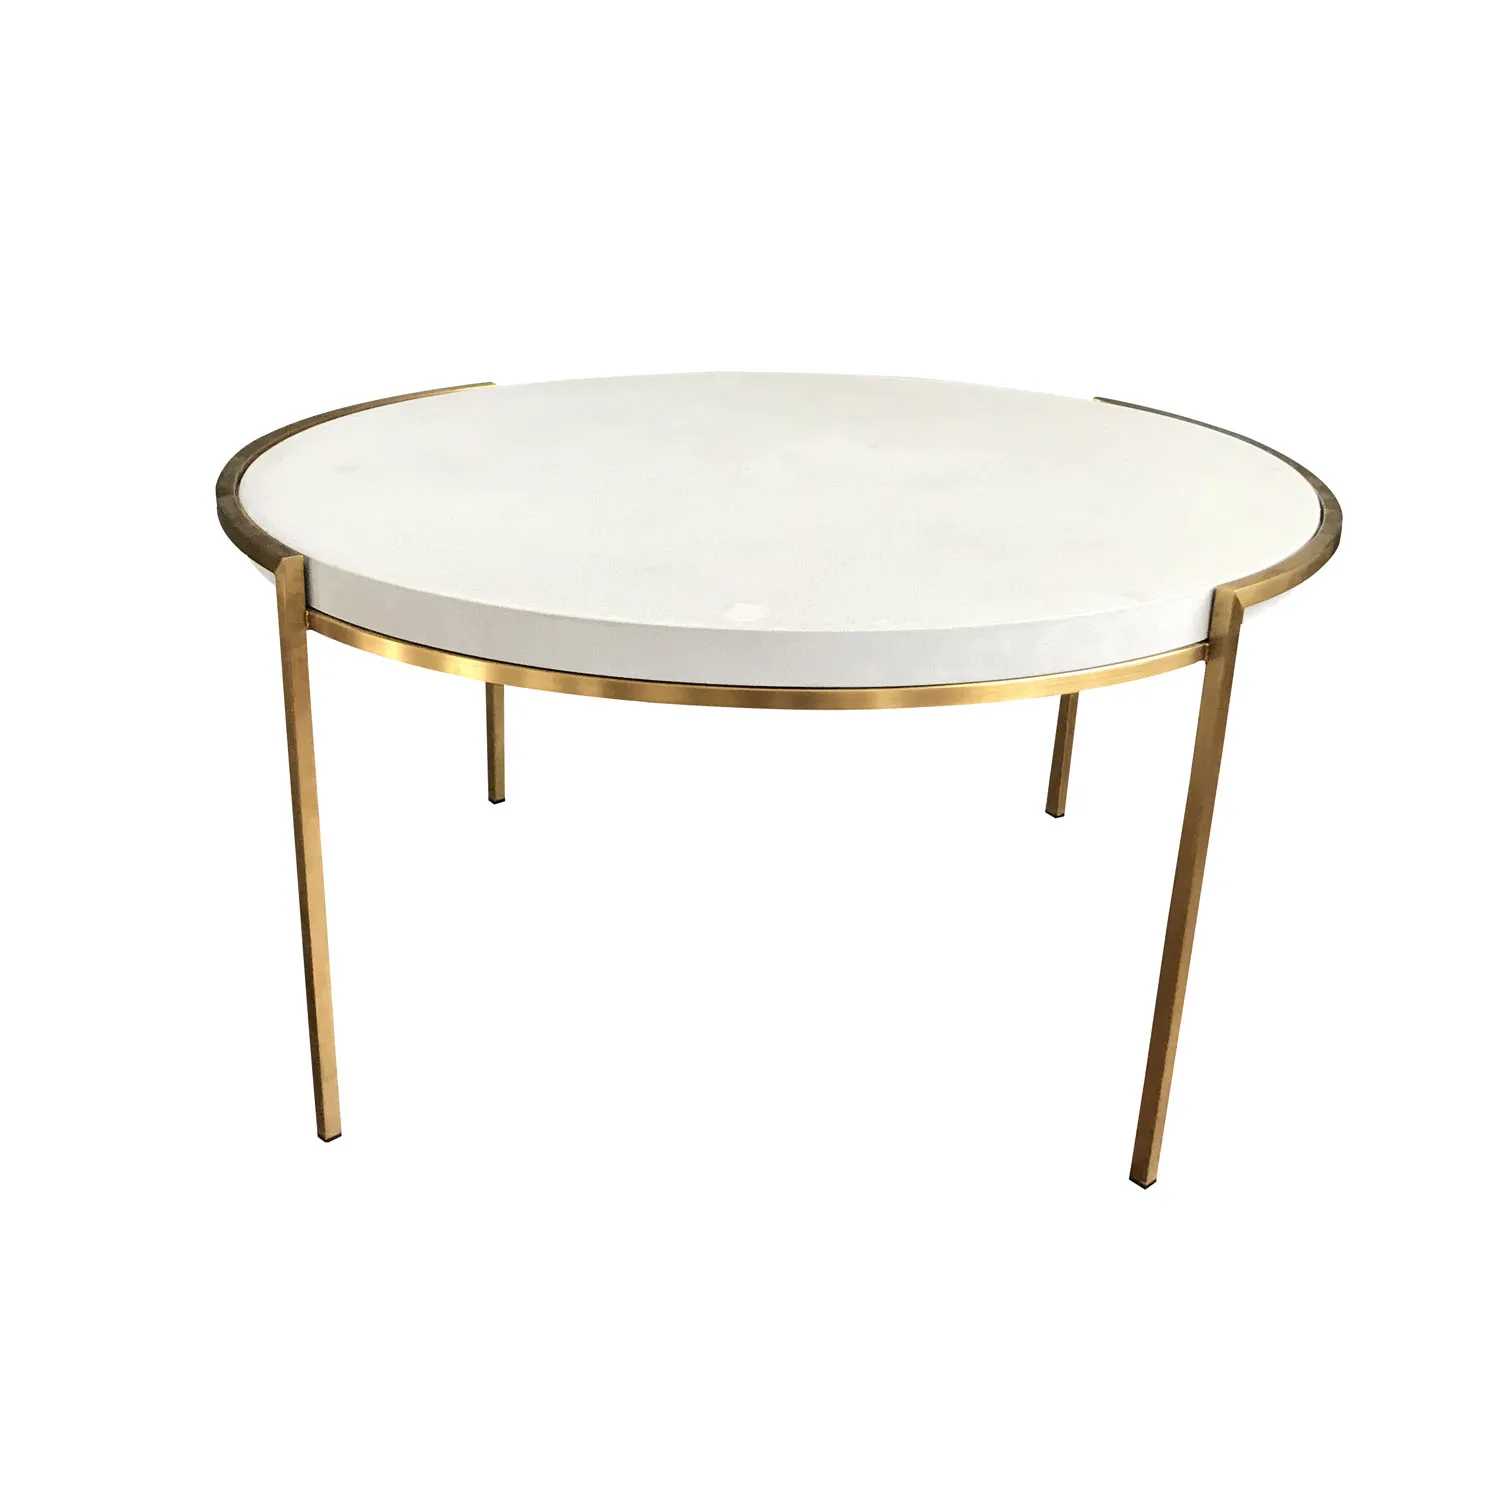 Round Marble Top Coffee Table Side Table 2 Pieces Gold Metal Base Living Room Combination Small Family Home Balcony Nesting Tables Amazon Co Uk Kitchen Home